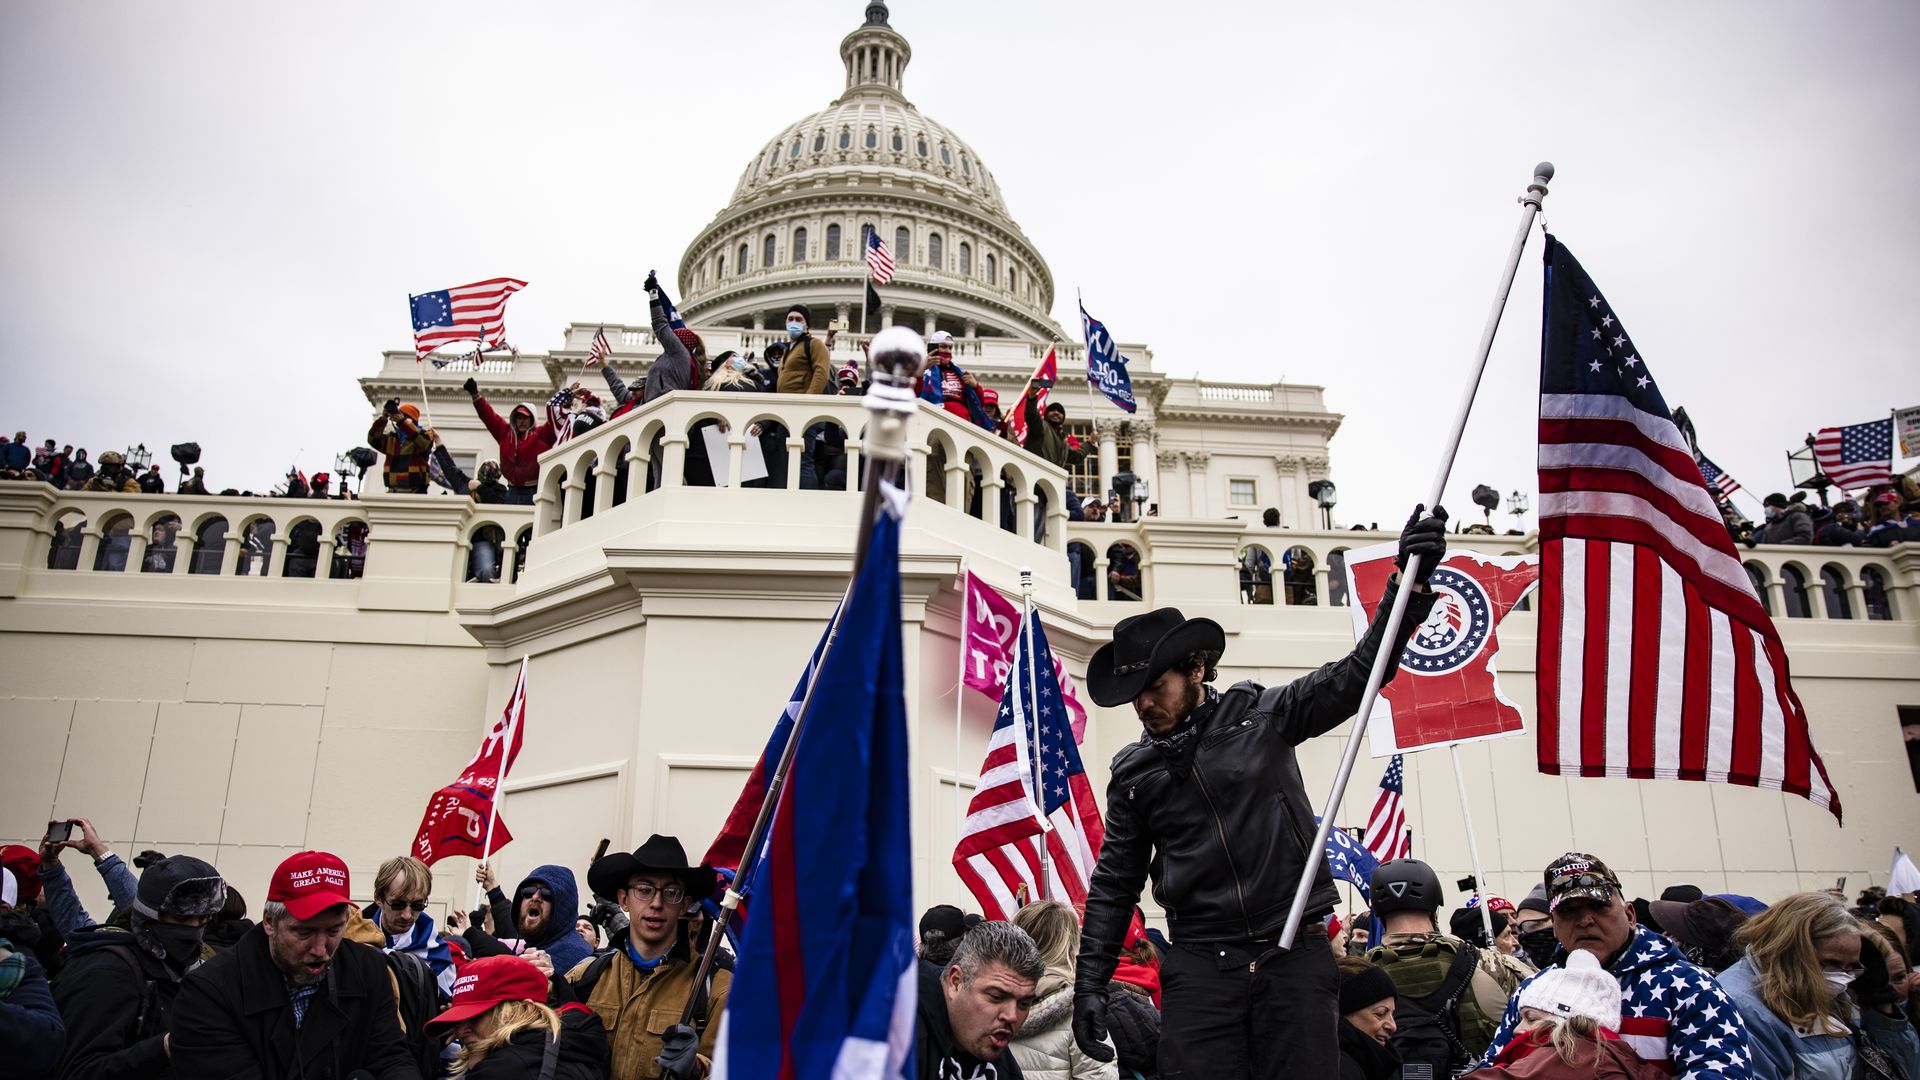 Pro-Trump supporters storm the U.S. Capitol following a rally with President Donald Trump on January 6